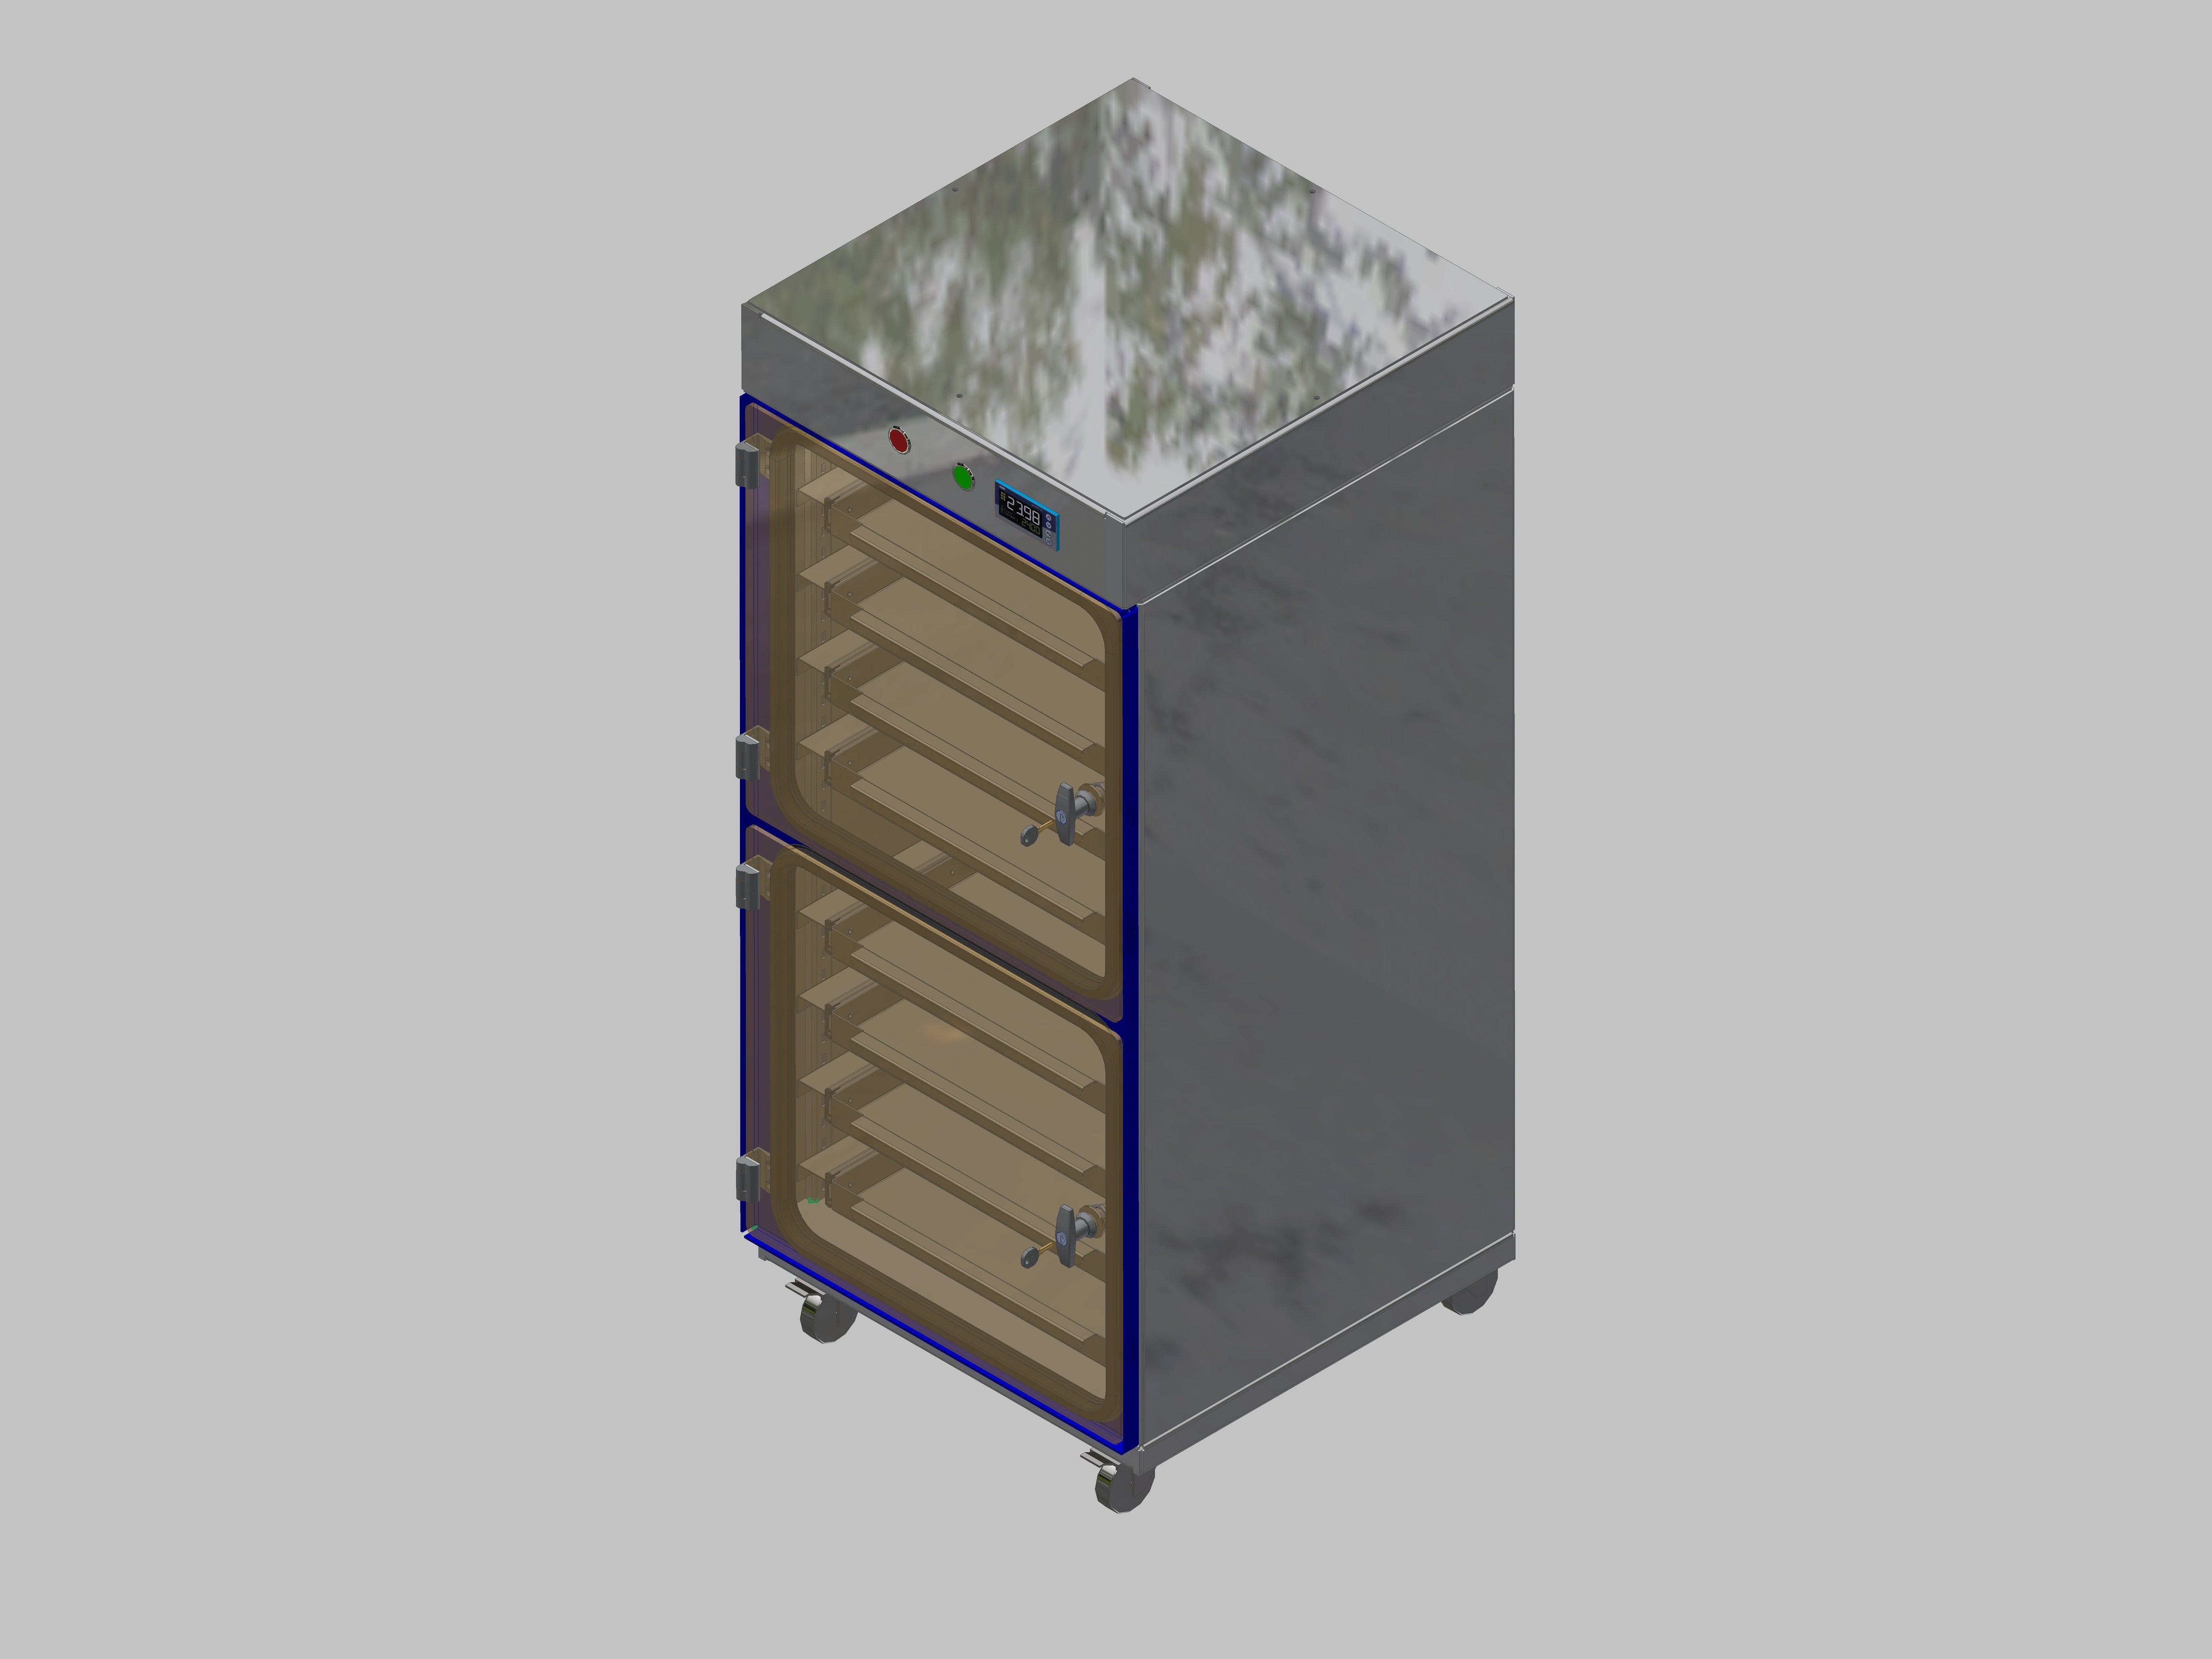 Dry storage cabinet-ITN-600-2 with 4 drawers per compartment and base design with wheels